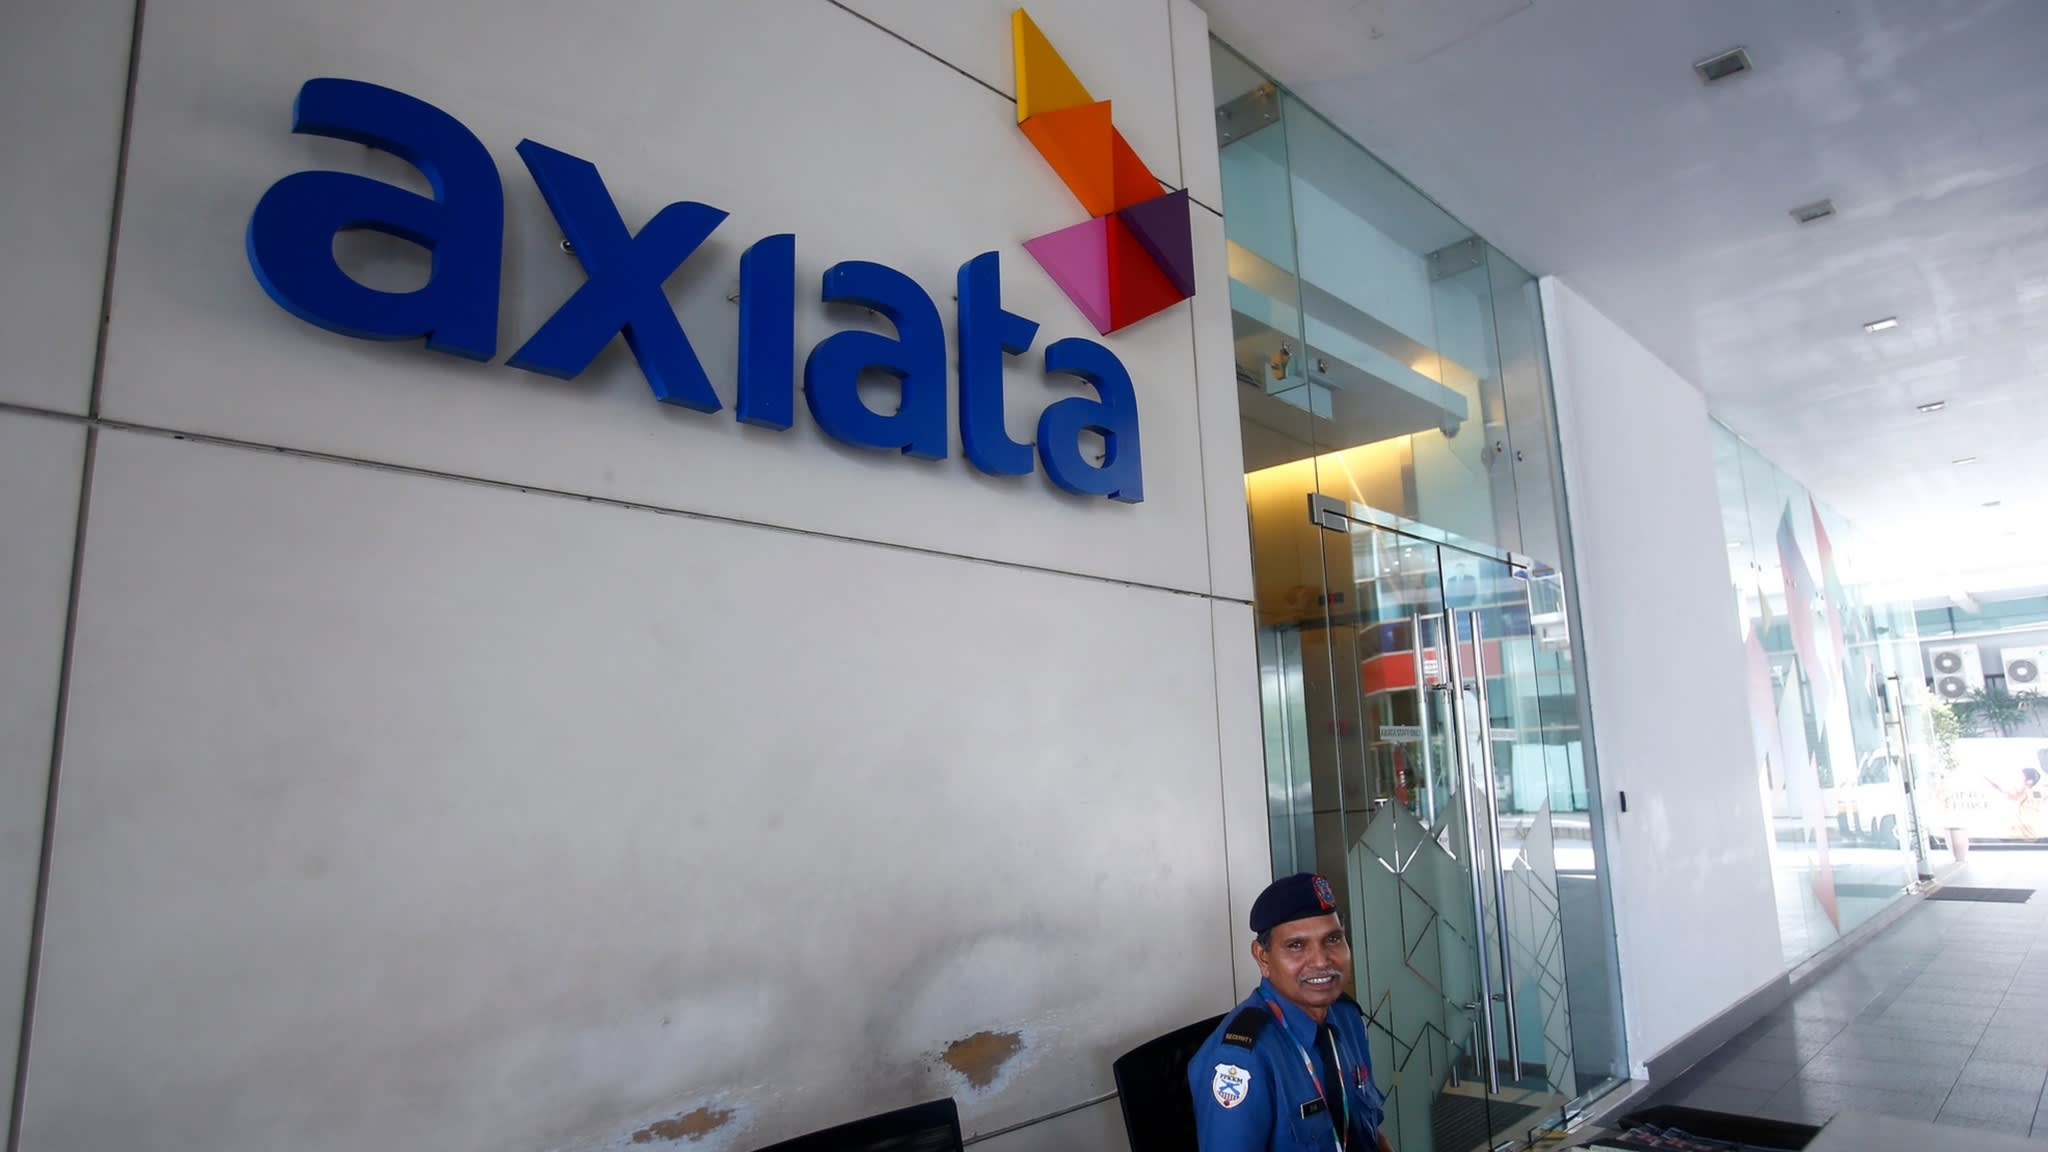 axiata-seeks-malaysia-indonesia-mergers-after-telenor-talks-ends